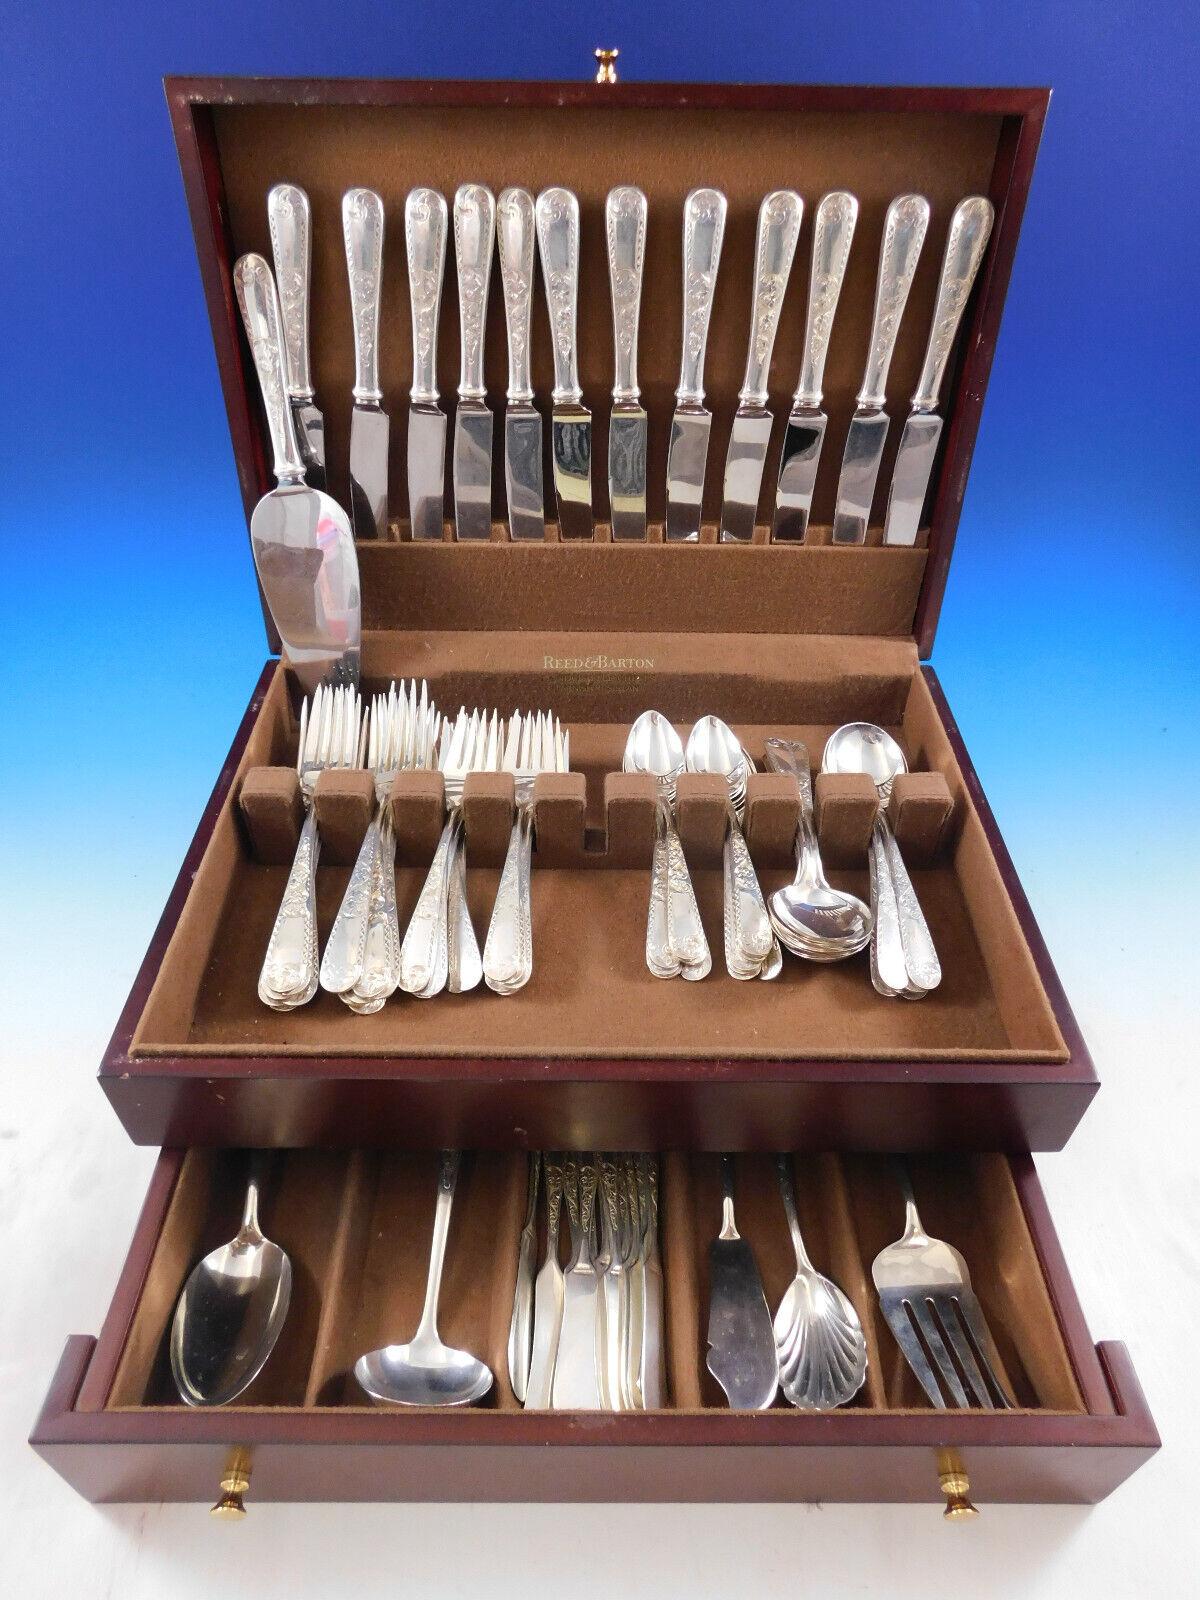 Mayflower by Kirk Sterling Silver Flatware set - 78 pieces. This set includes:

12 Knives, 9